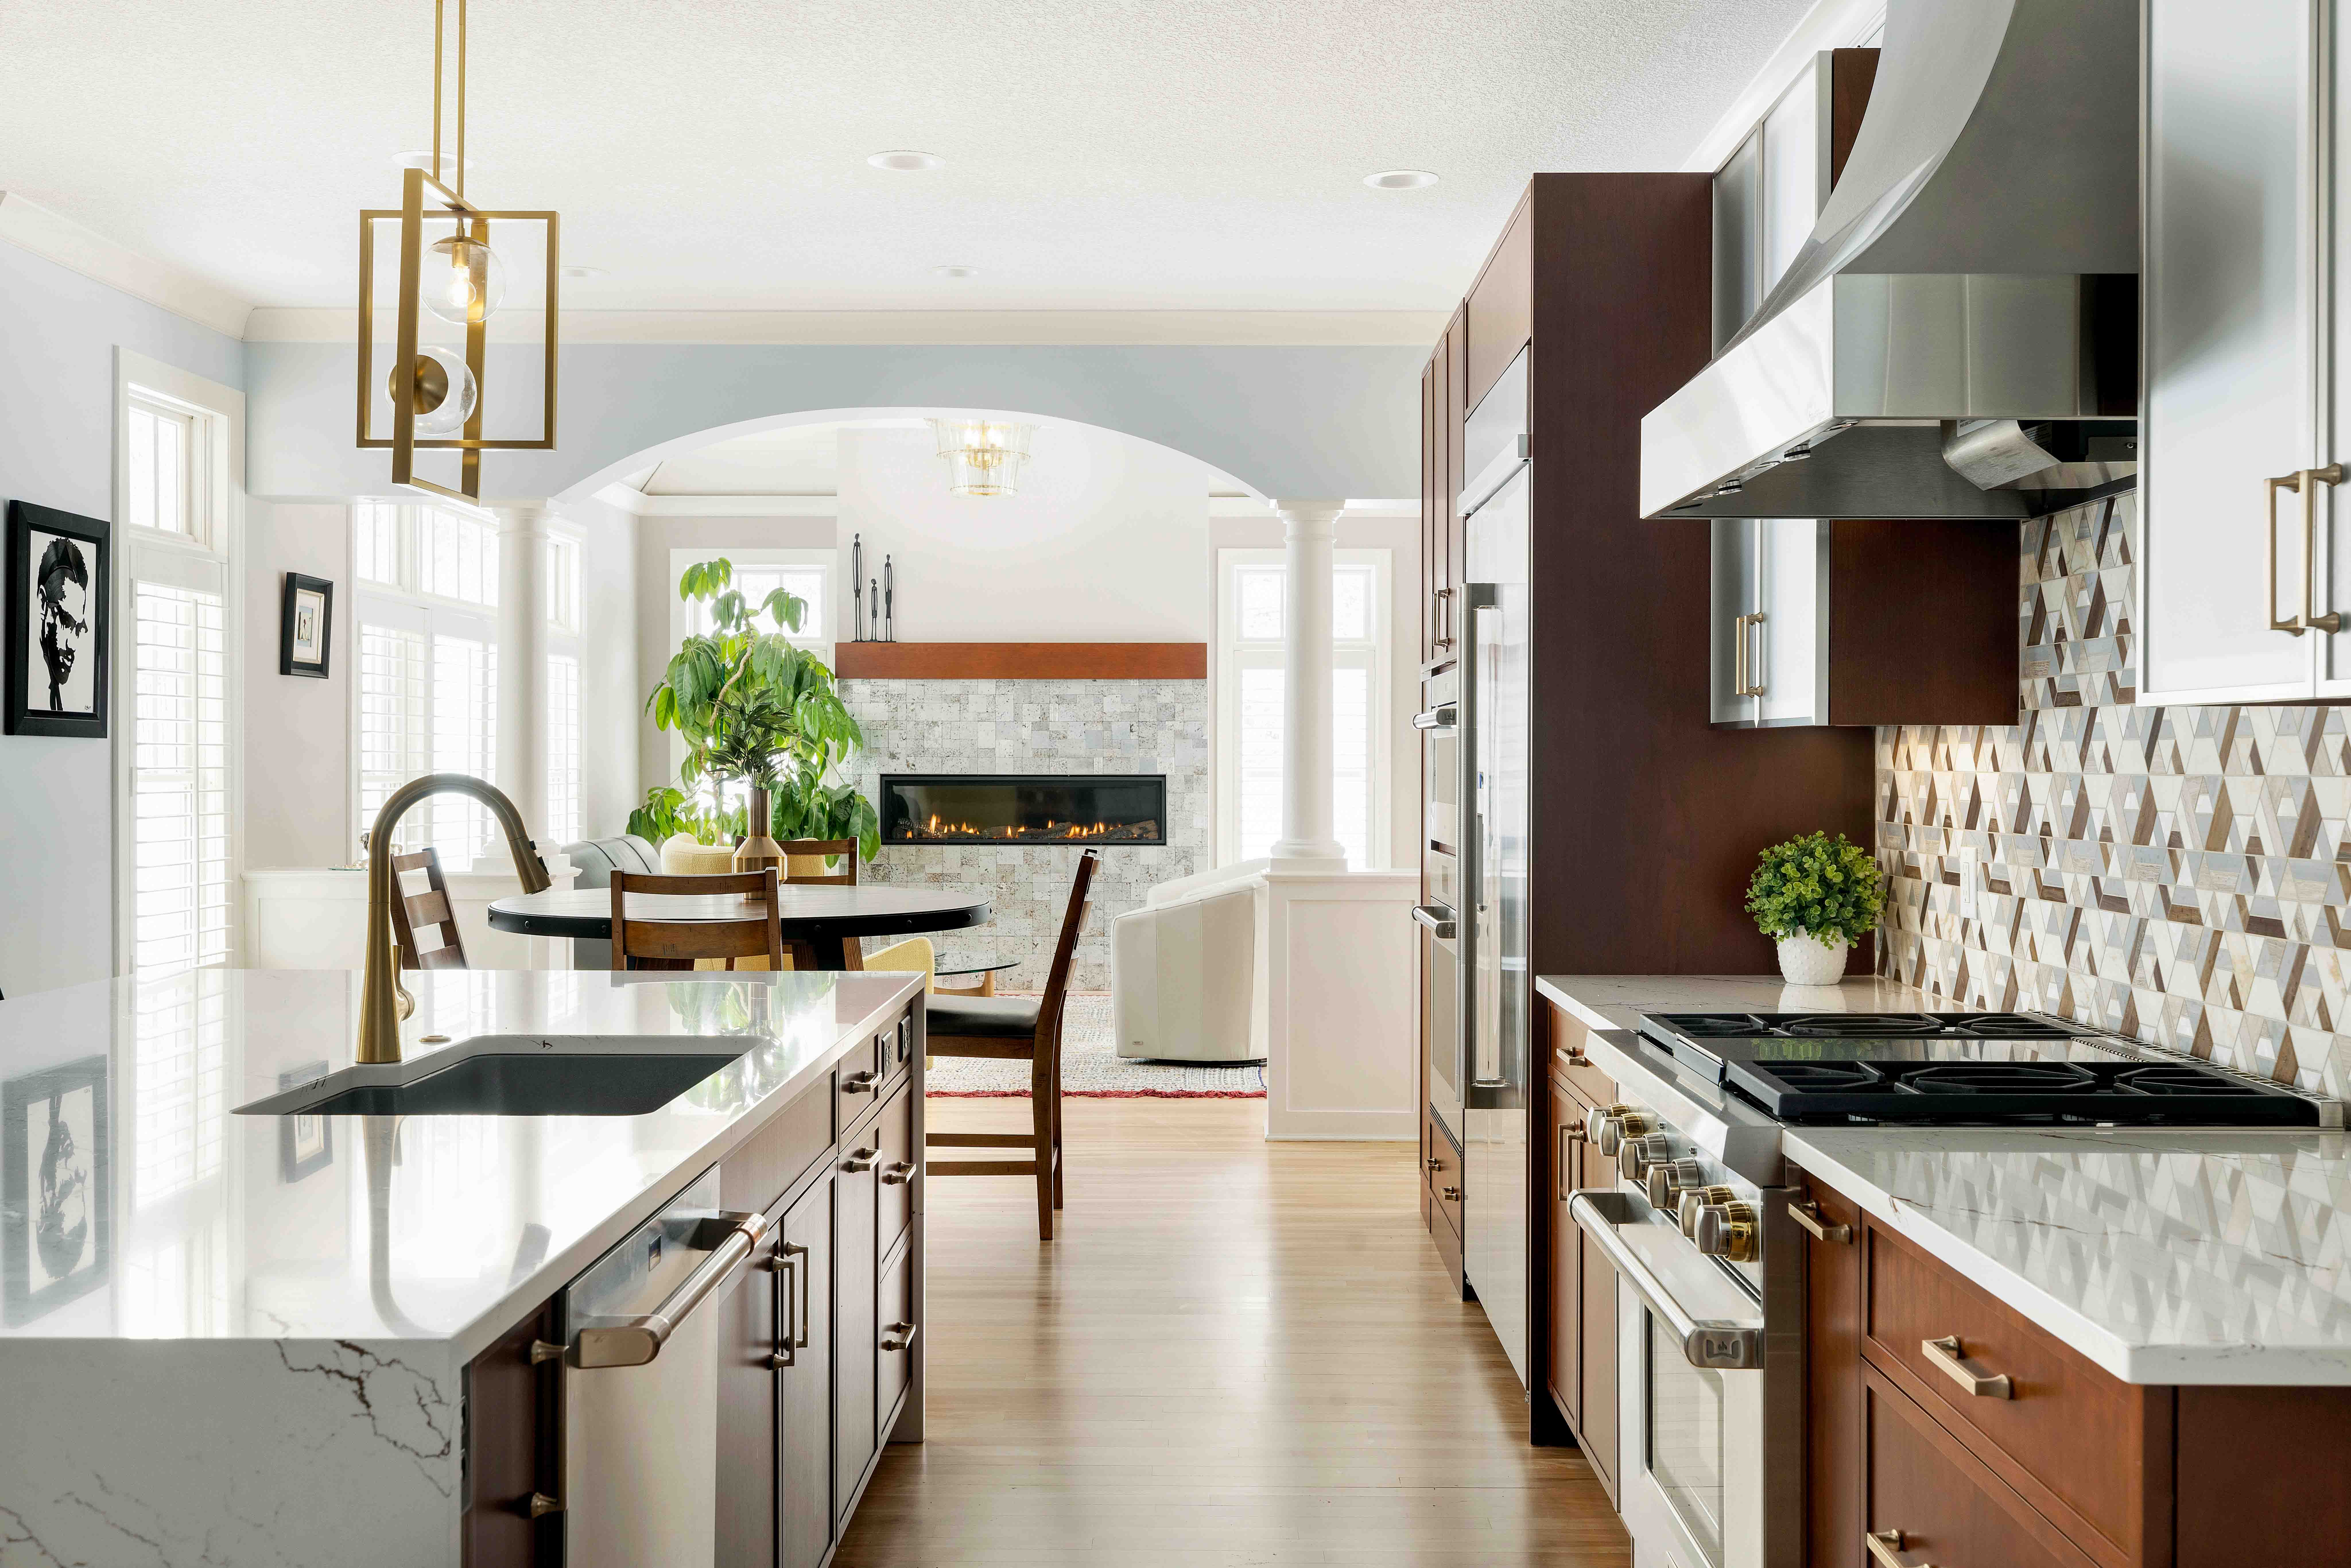 Where to Splurge When Remodeling Your Kitchen